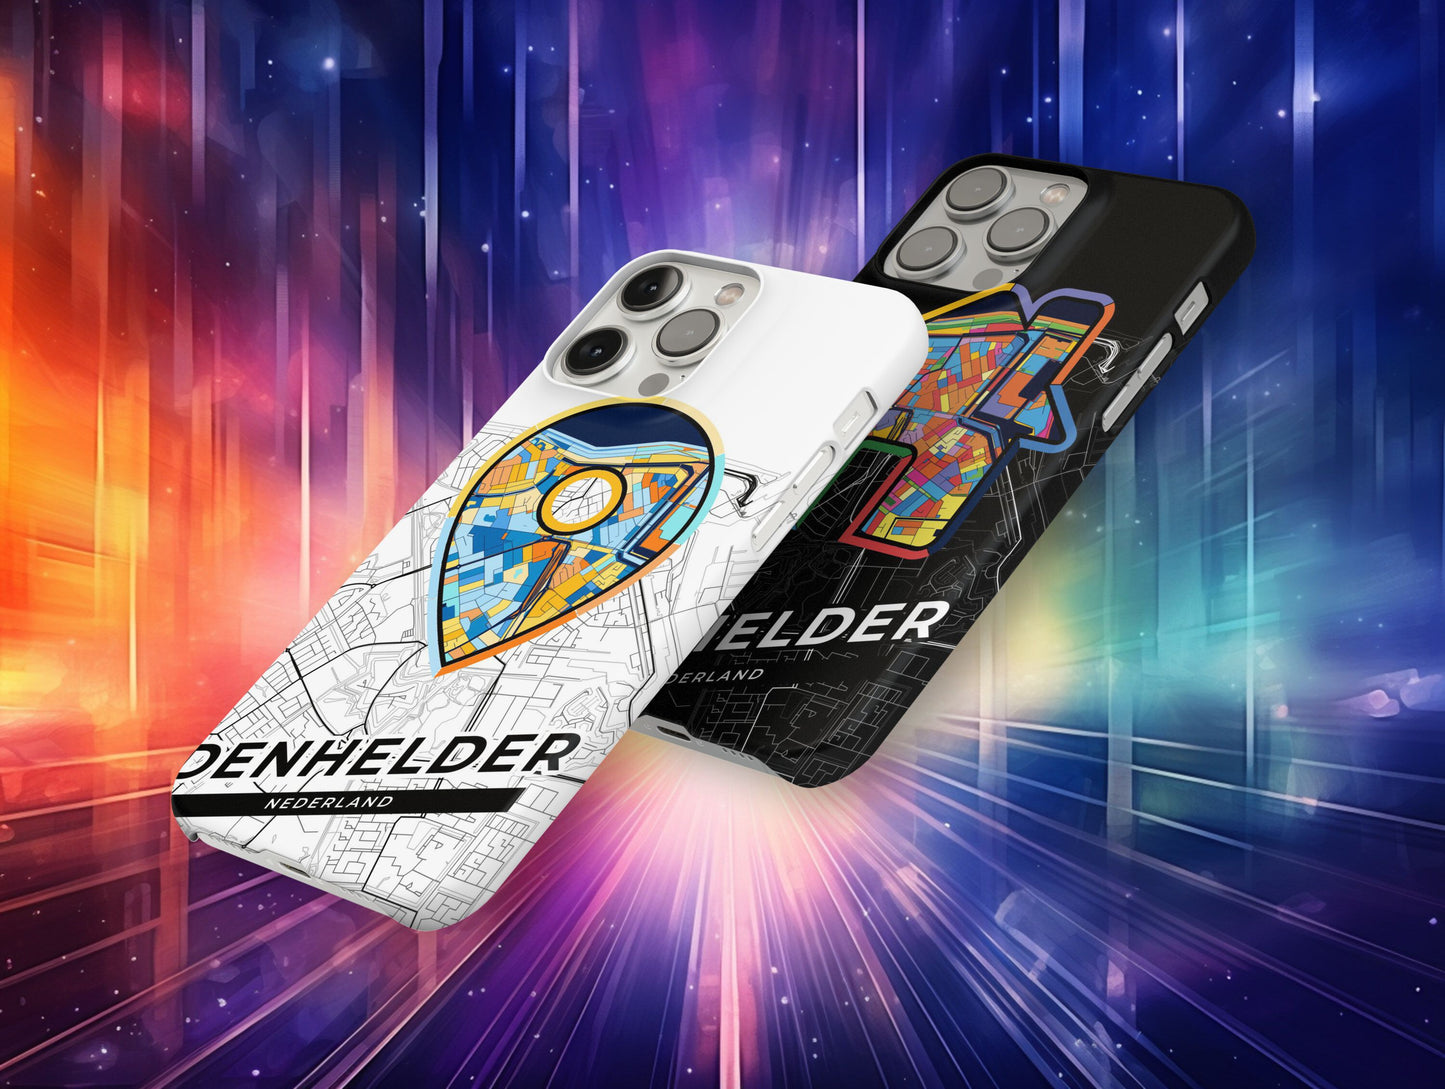 Den Helder Netherlands slim phone case with colorful icon. Birthday, wedding or housewarming gift. Couple match cases.